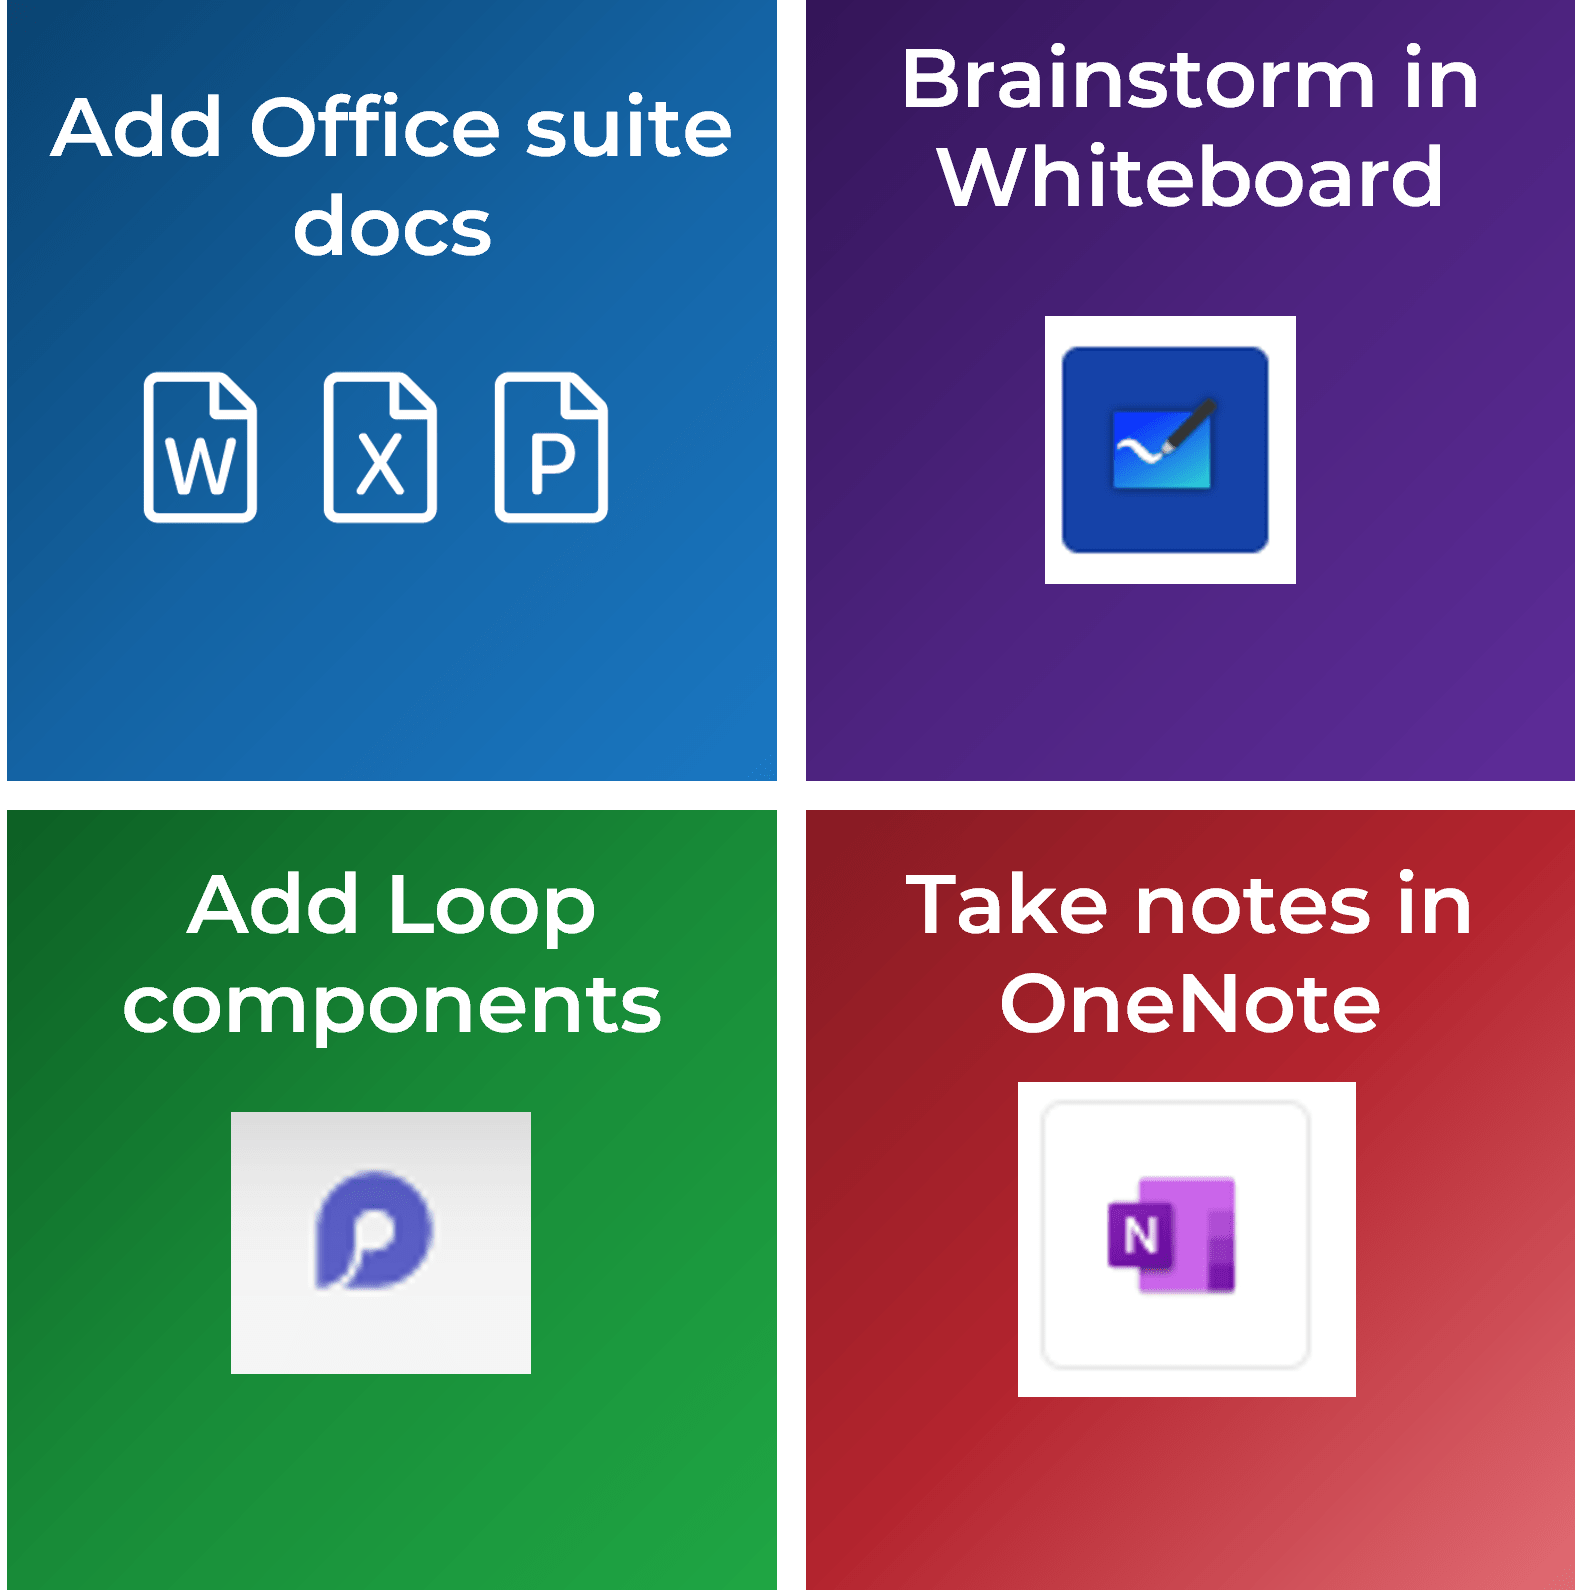 Samples of four features: 'Add Office suite docs', 'Brainstorm in Whiteboard', 'Add Loop components', and 'Take notes in OneNote'.